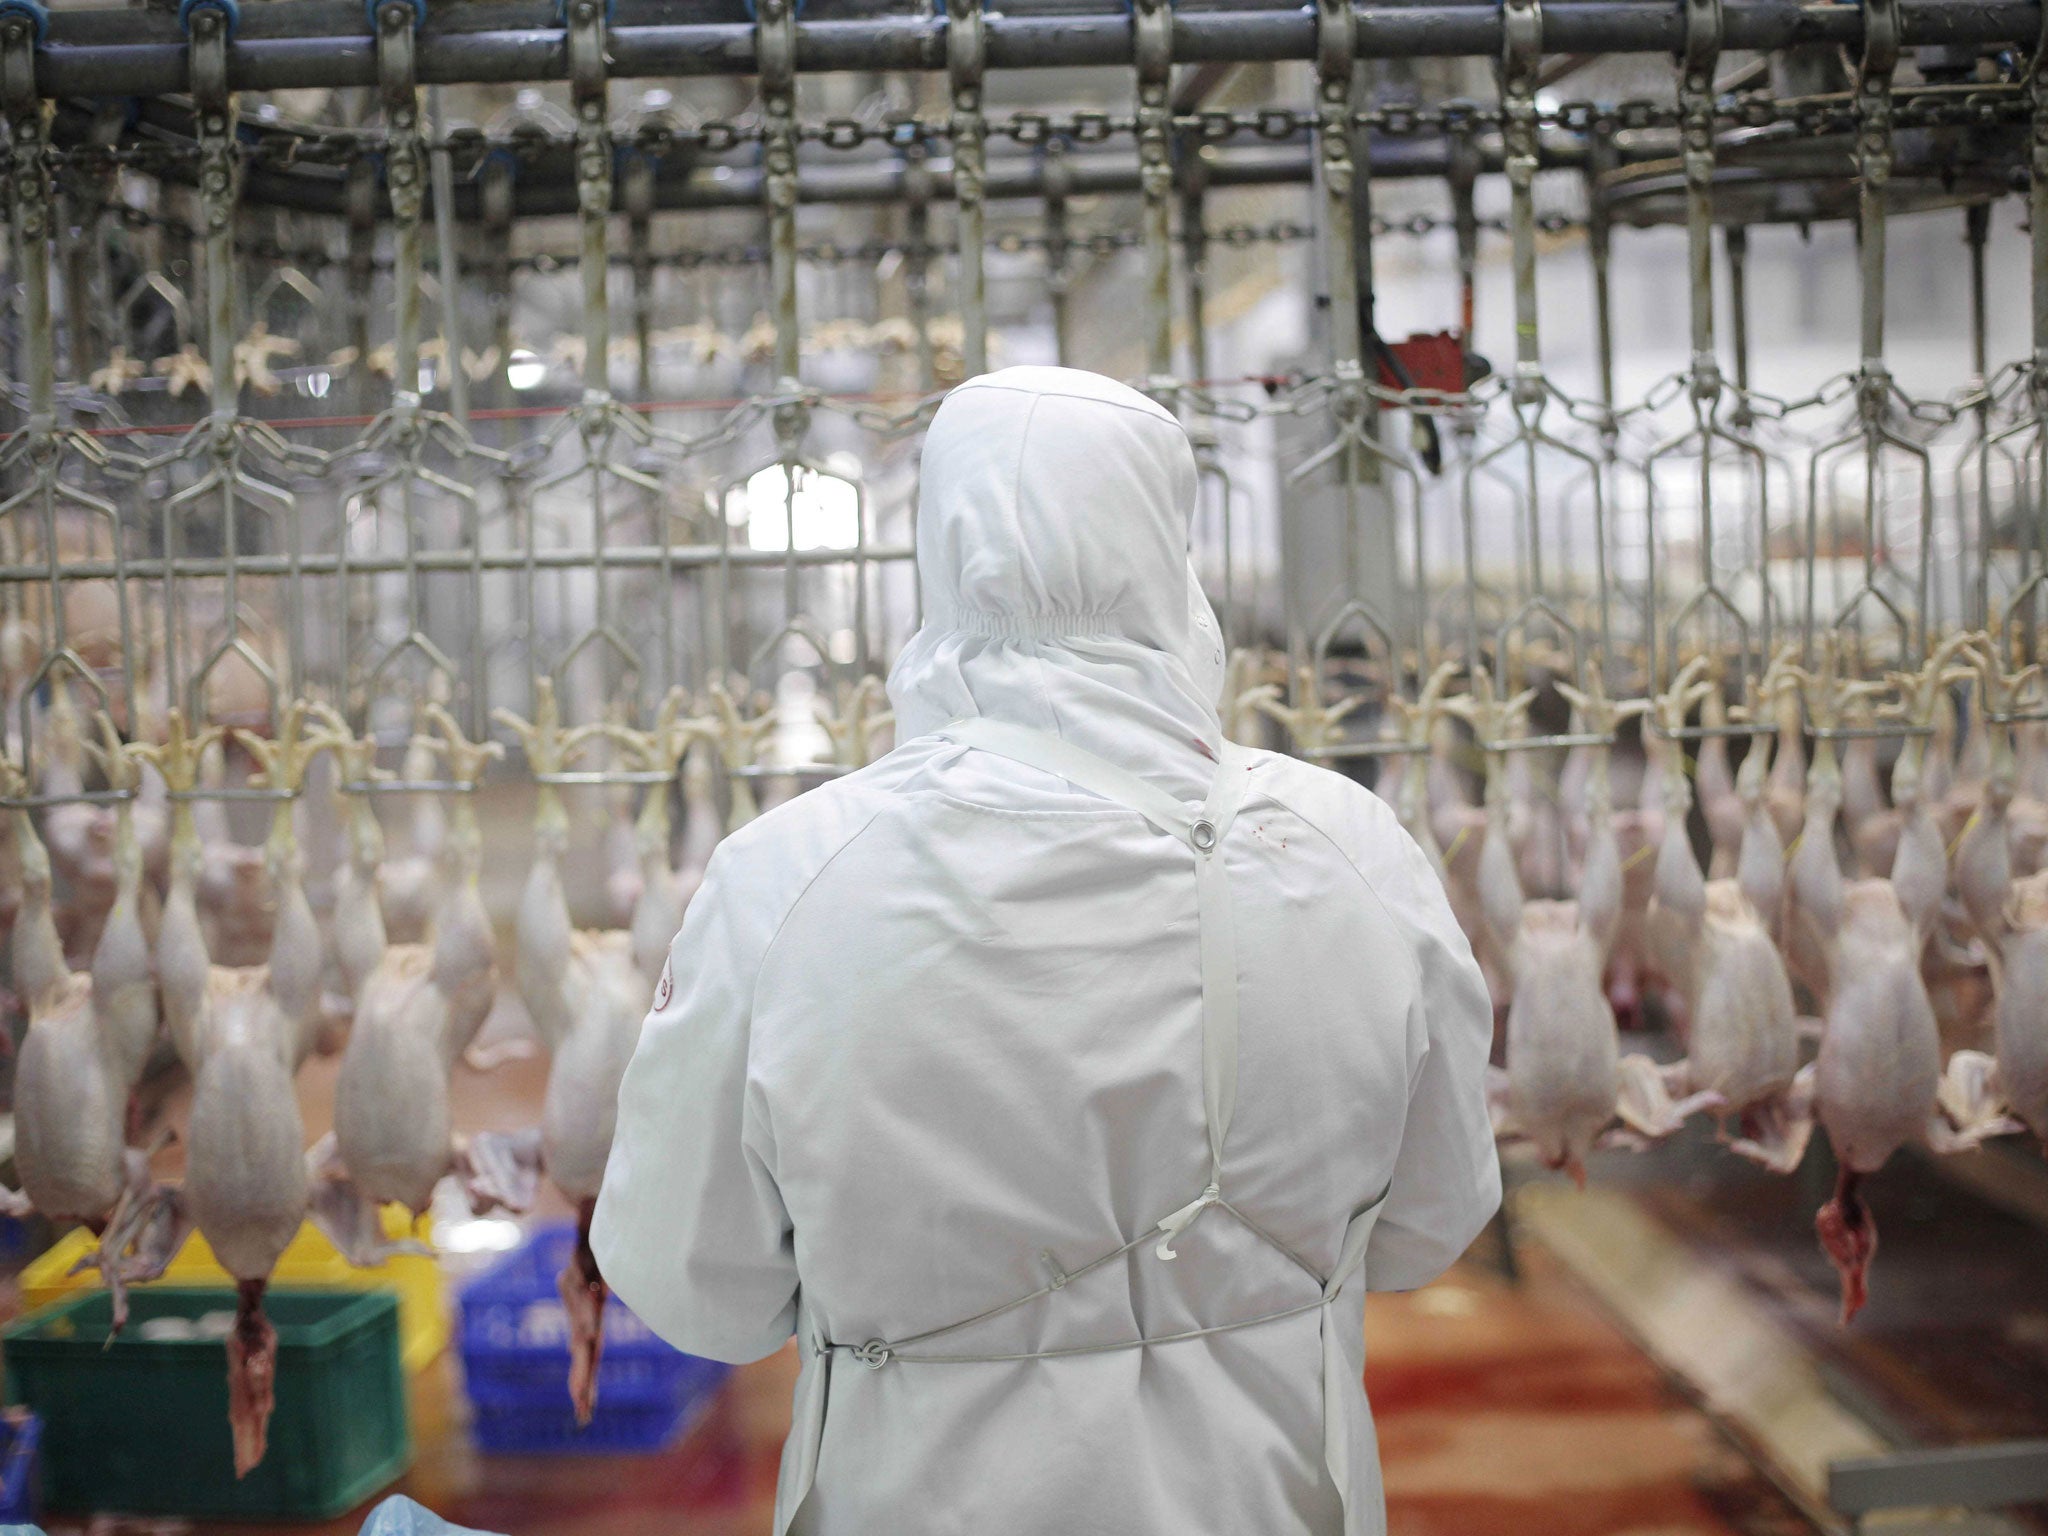 If you've ever eaten one of these chickens, you're already a Muslim